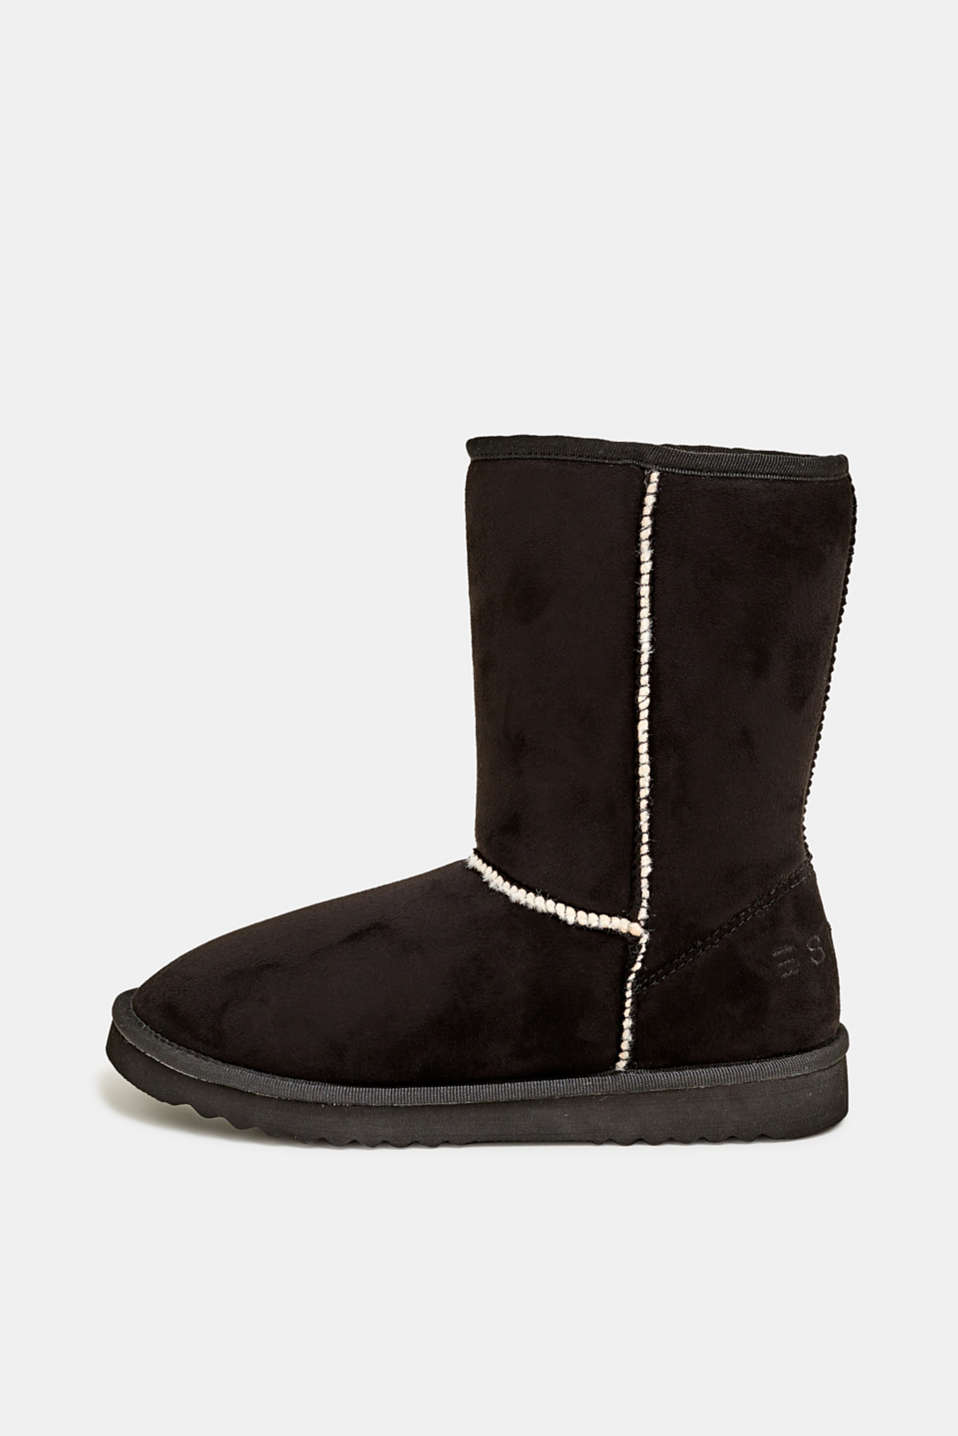 Esprit - Winter boots with faux fur lining at our Online Shop